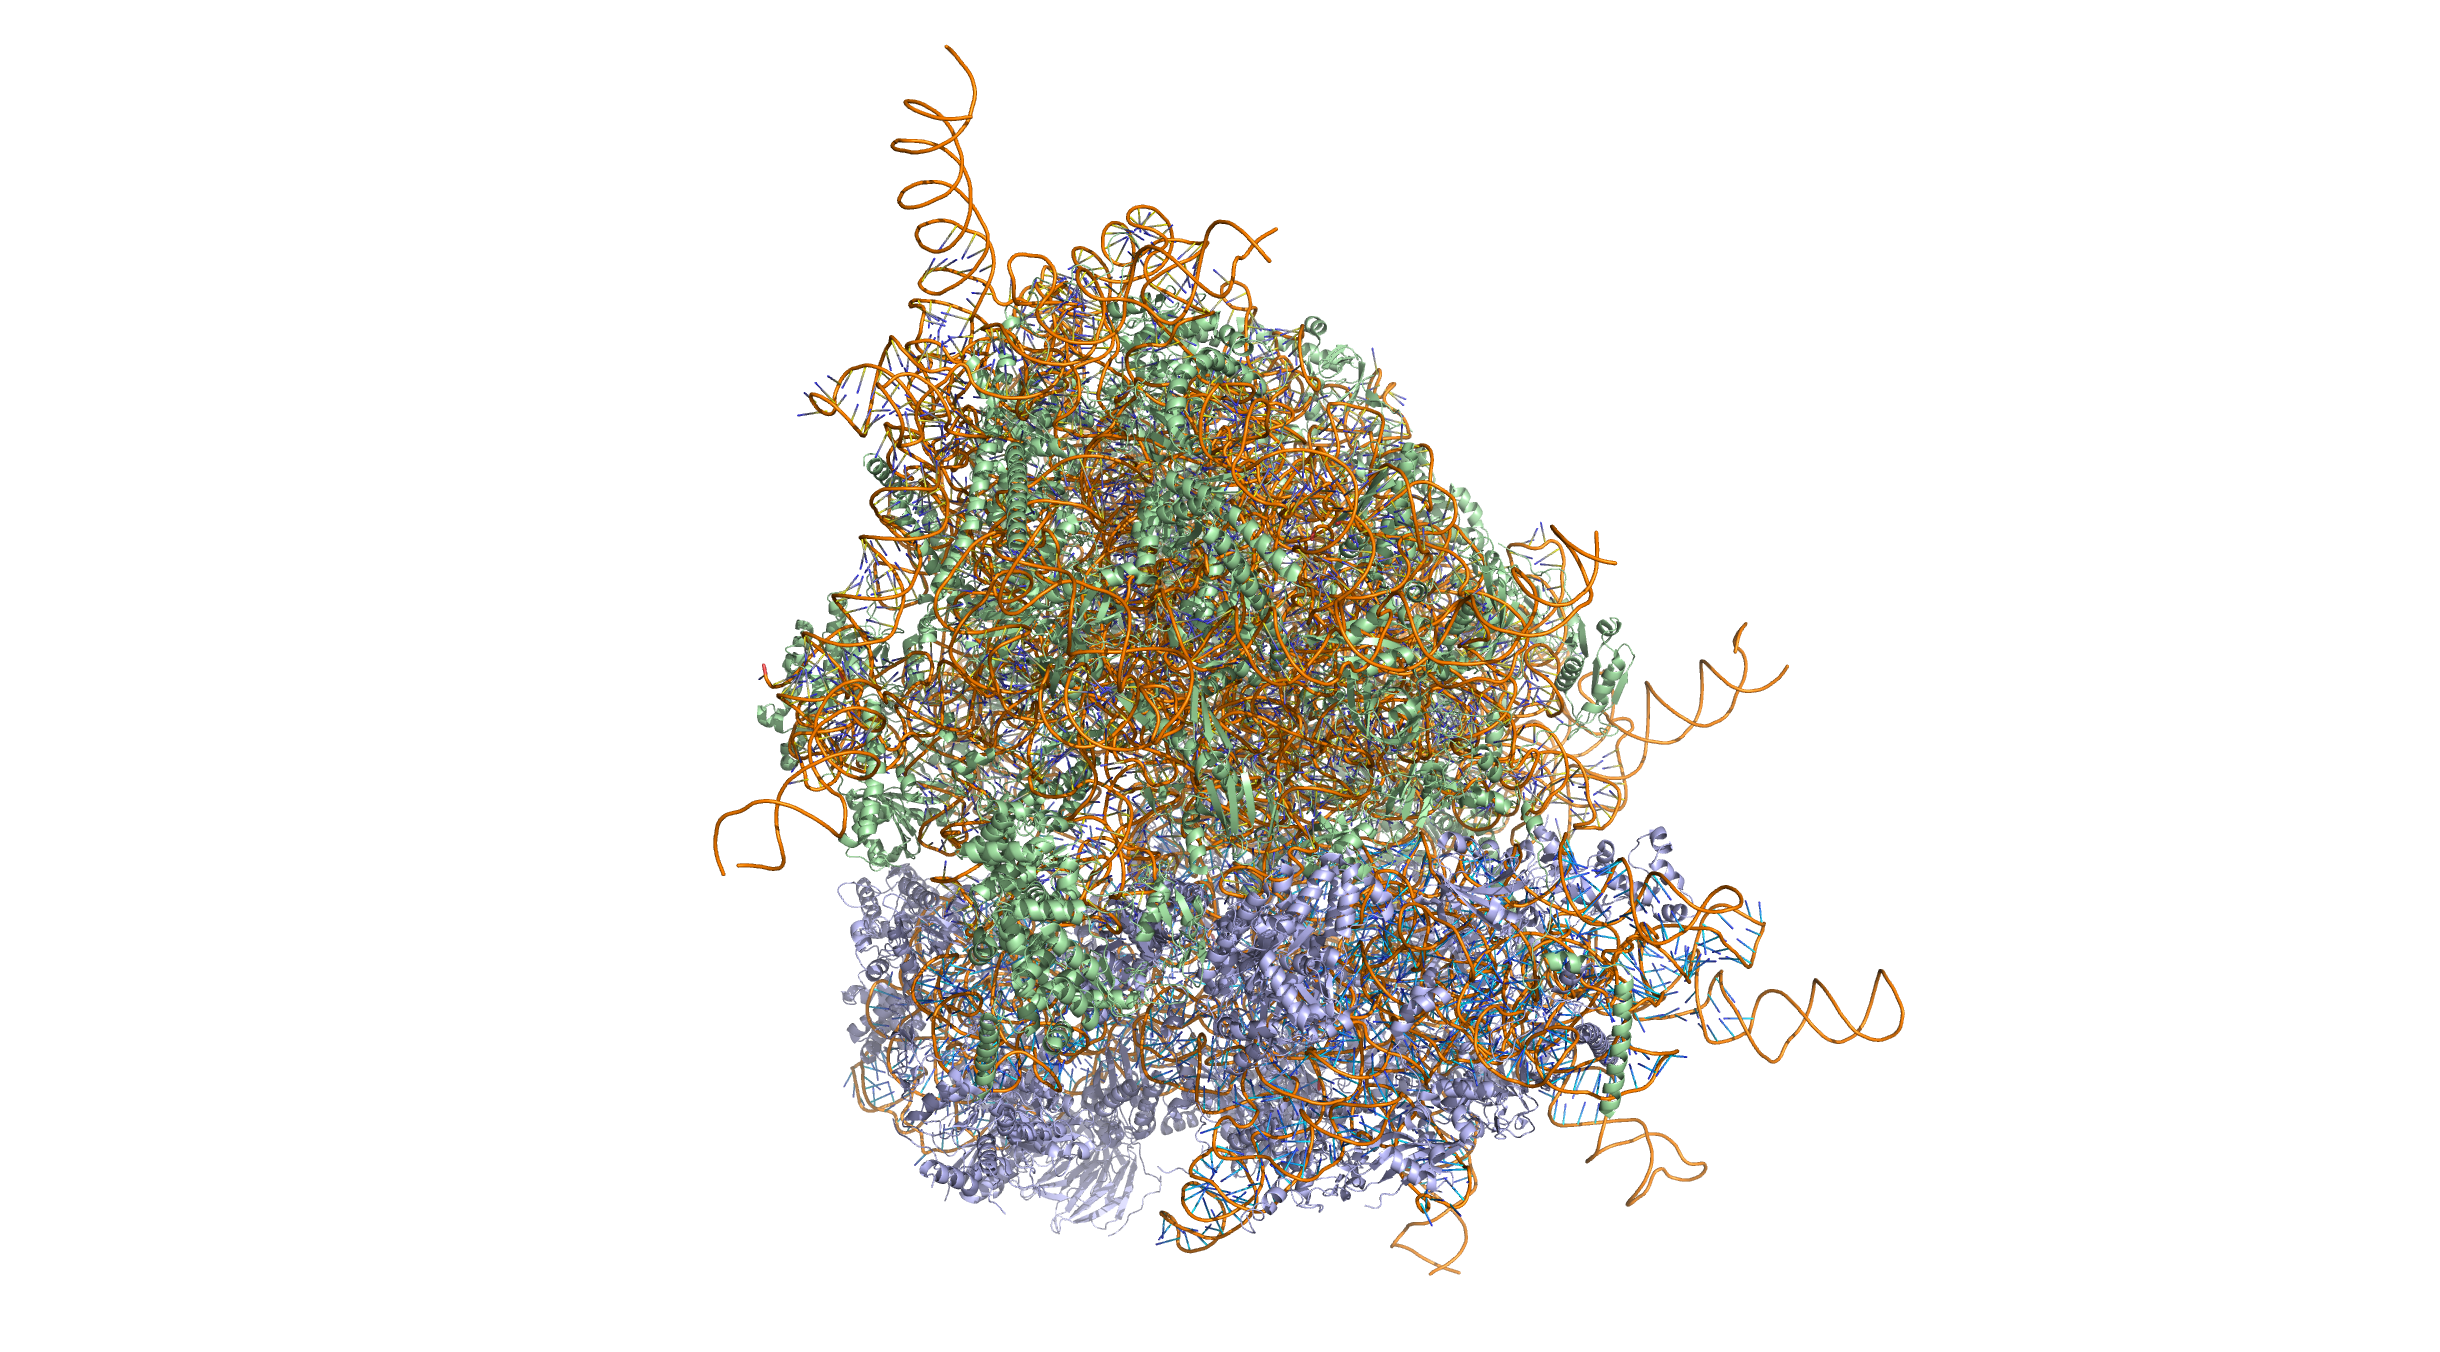 Crystal structure of the human 80S ribosome (based on atomic coordinates of PDB 4V6X rendered with open source molecular visualization tool PyMol). The 40S (small) ribosomal subunit proteins are shown in lightblue, the 60S (large) subunit proteins in palegreen, the ribosomal RNA in orange.